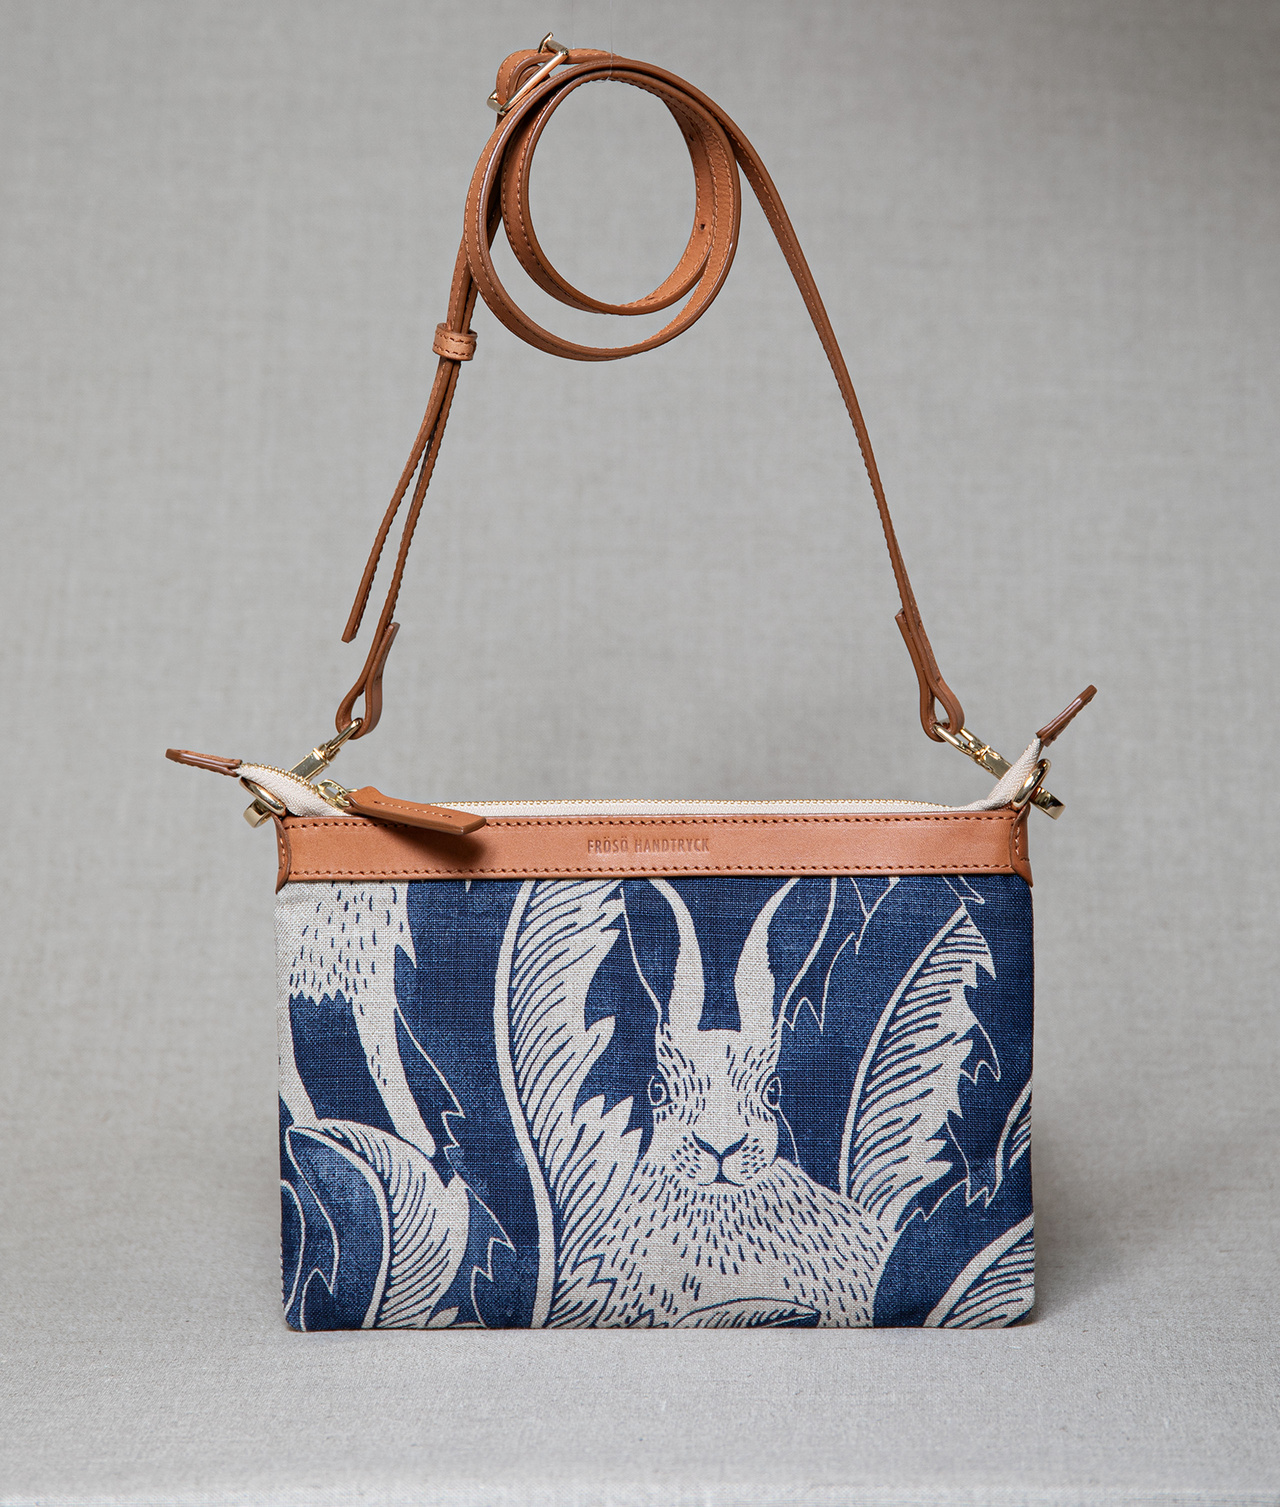 Clutch KARIN "Hares in hiding" Blue